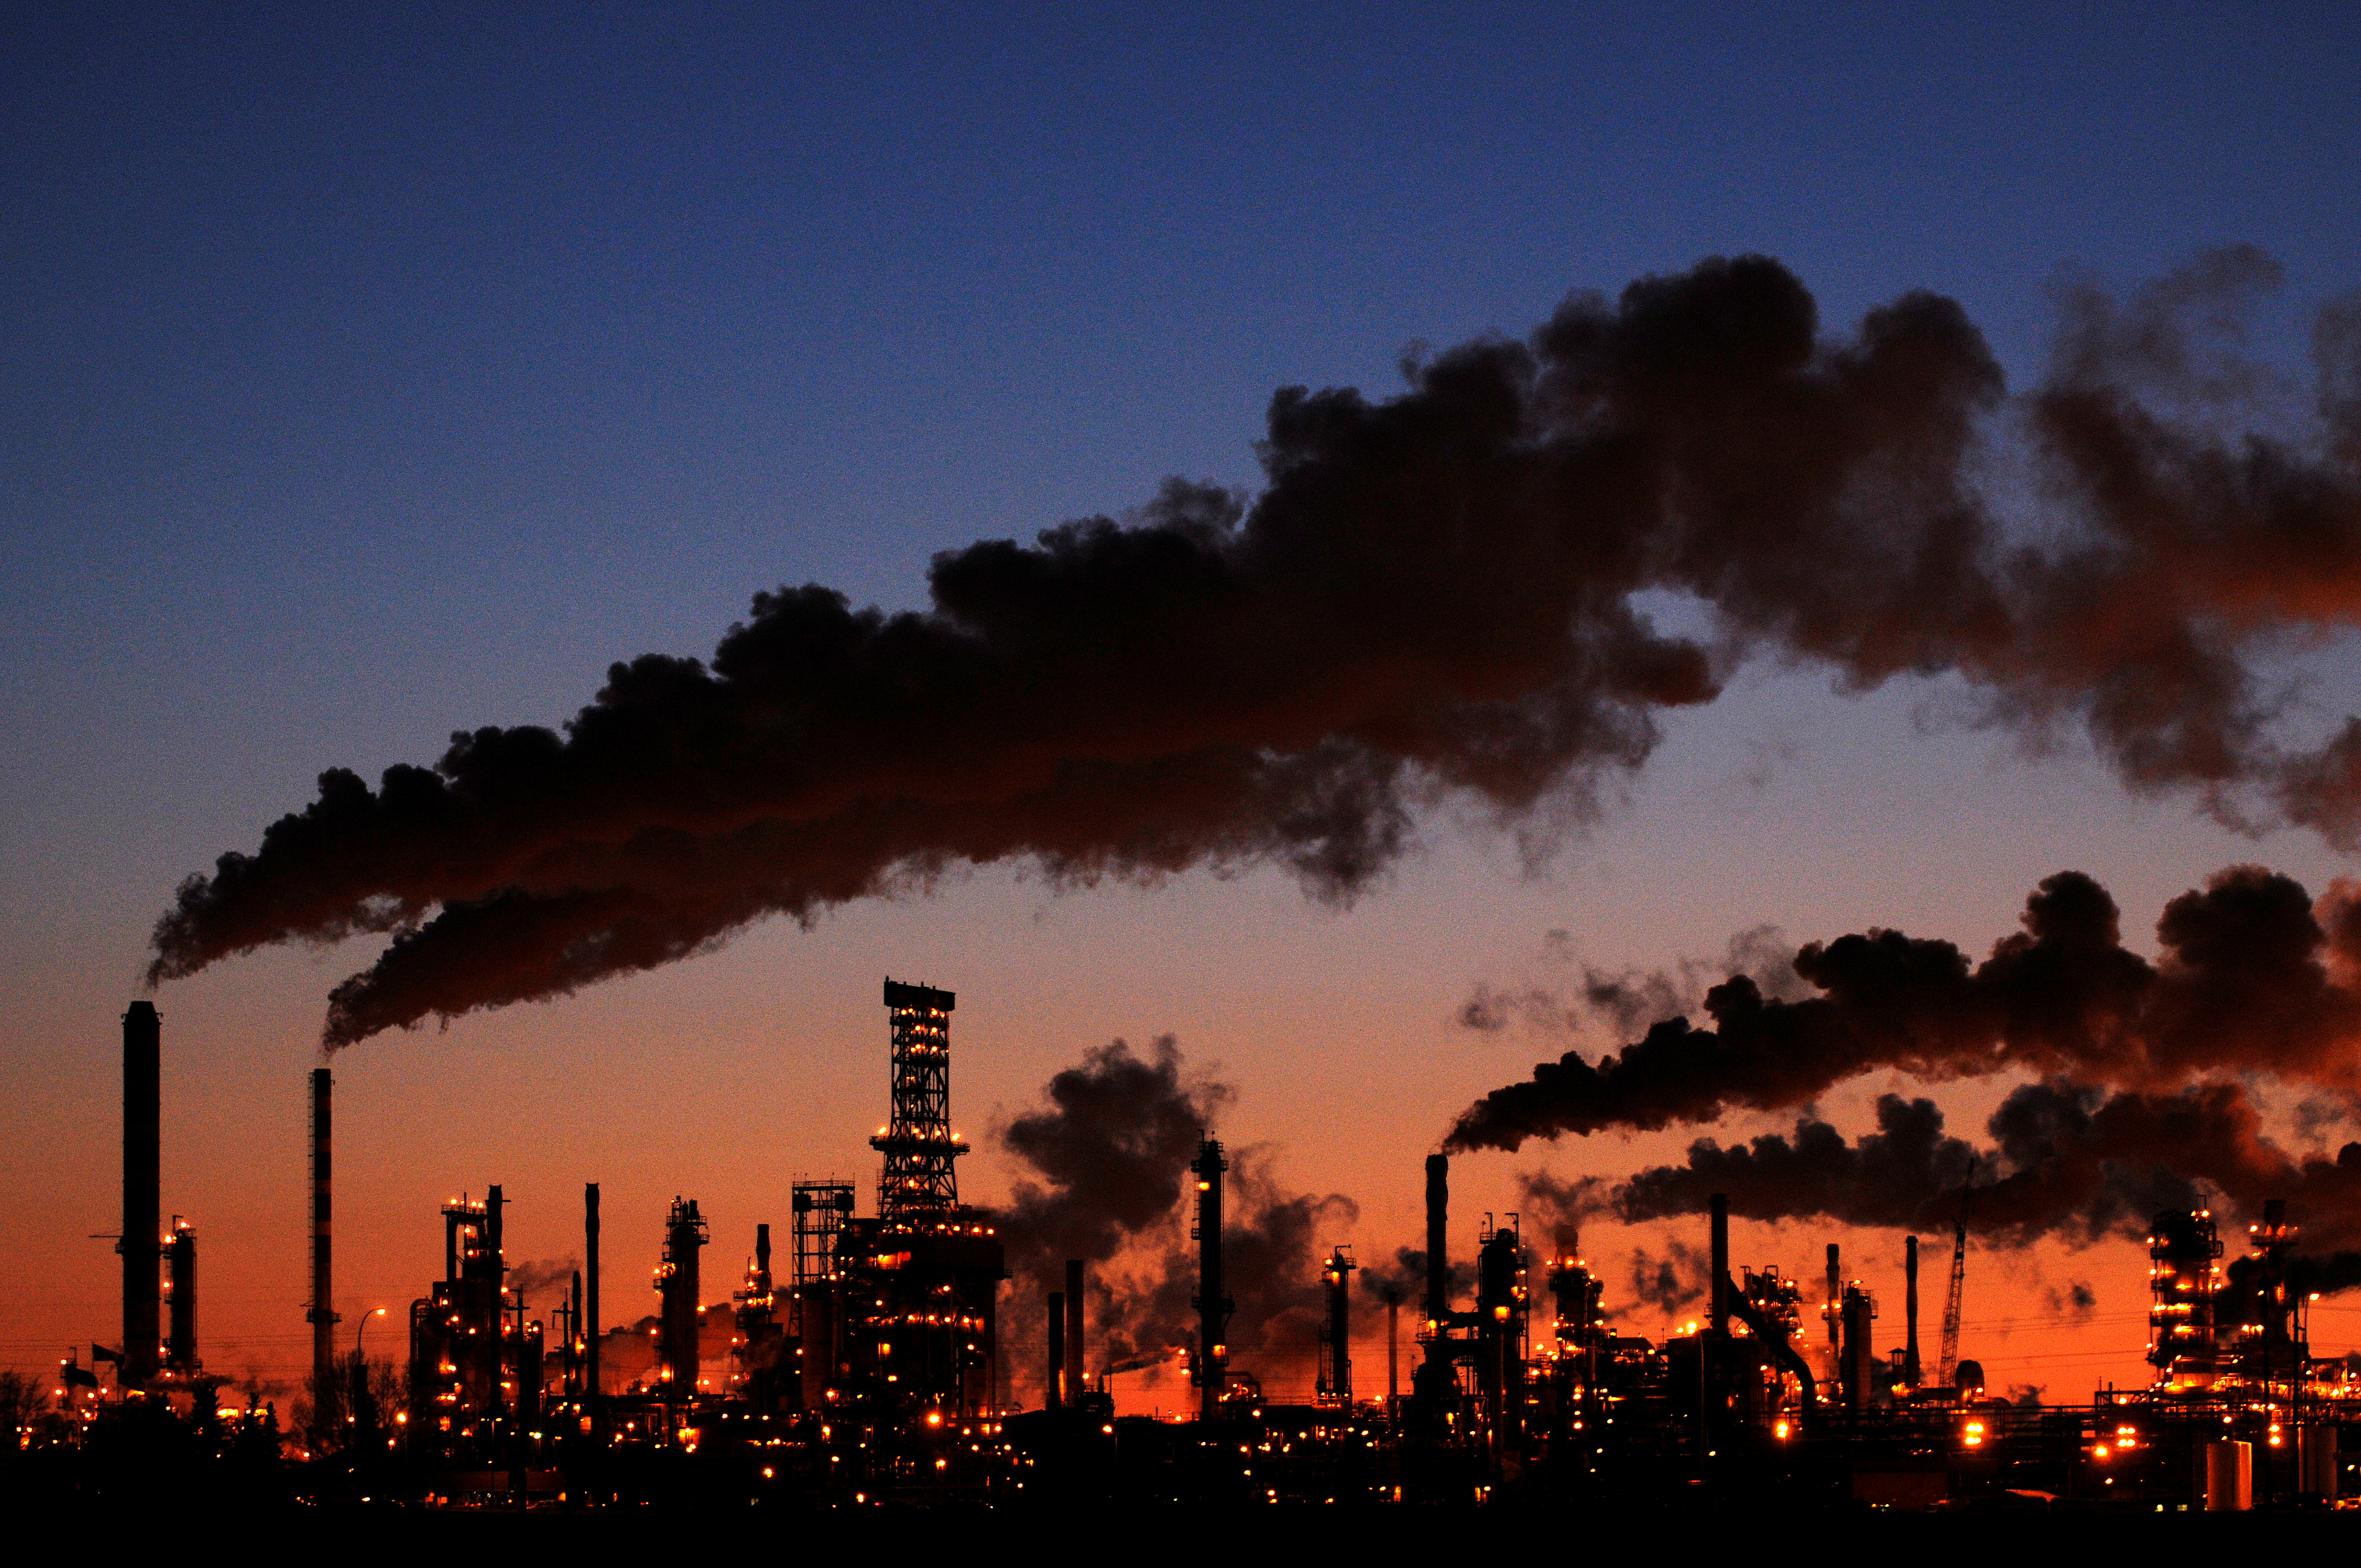 Petro-Canada's Edmonton Refinery and Distribution Centre glows at dusk in Edmonton February 15, 2009.  REUTERS/Dan Riedlhuber